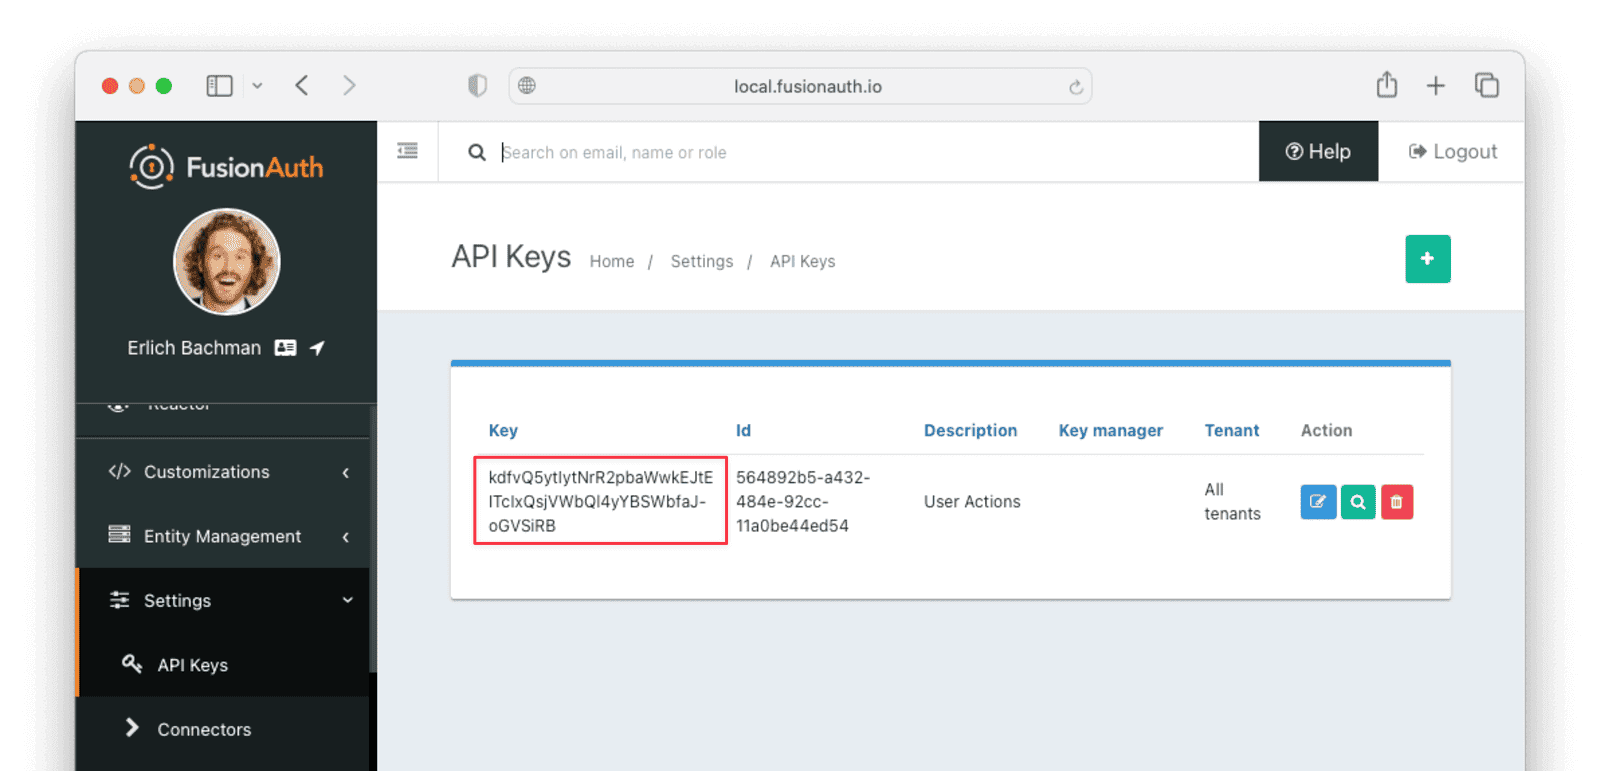 Record the value of the API key to use later.